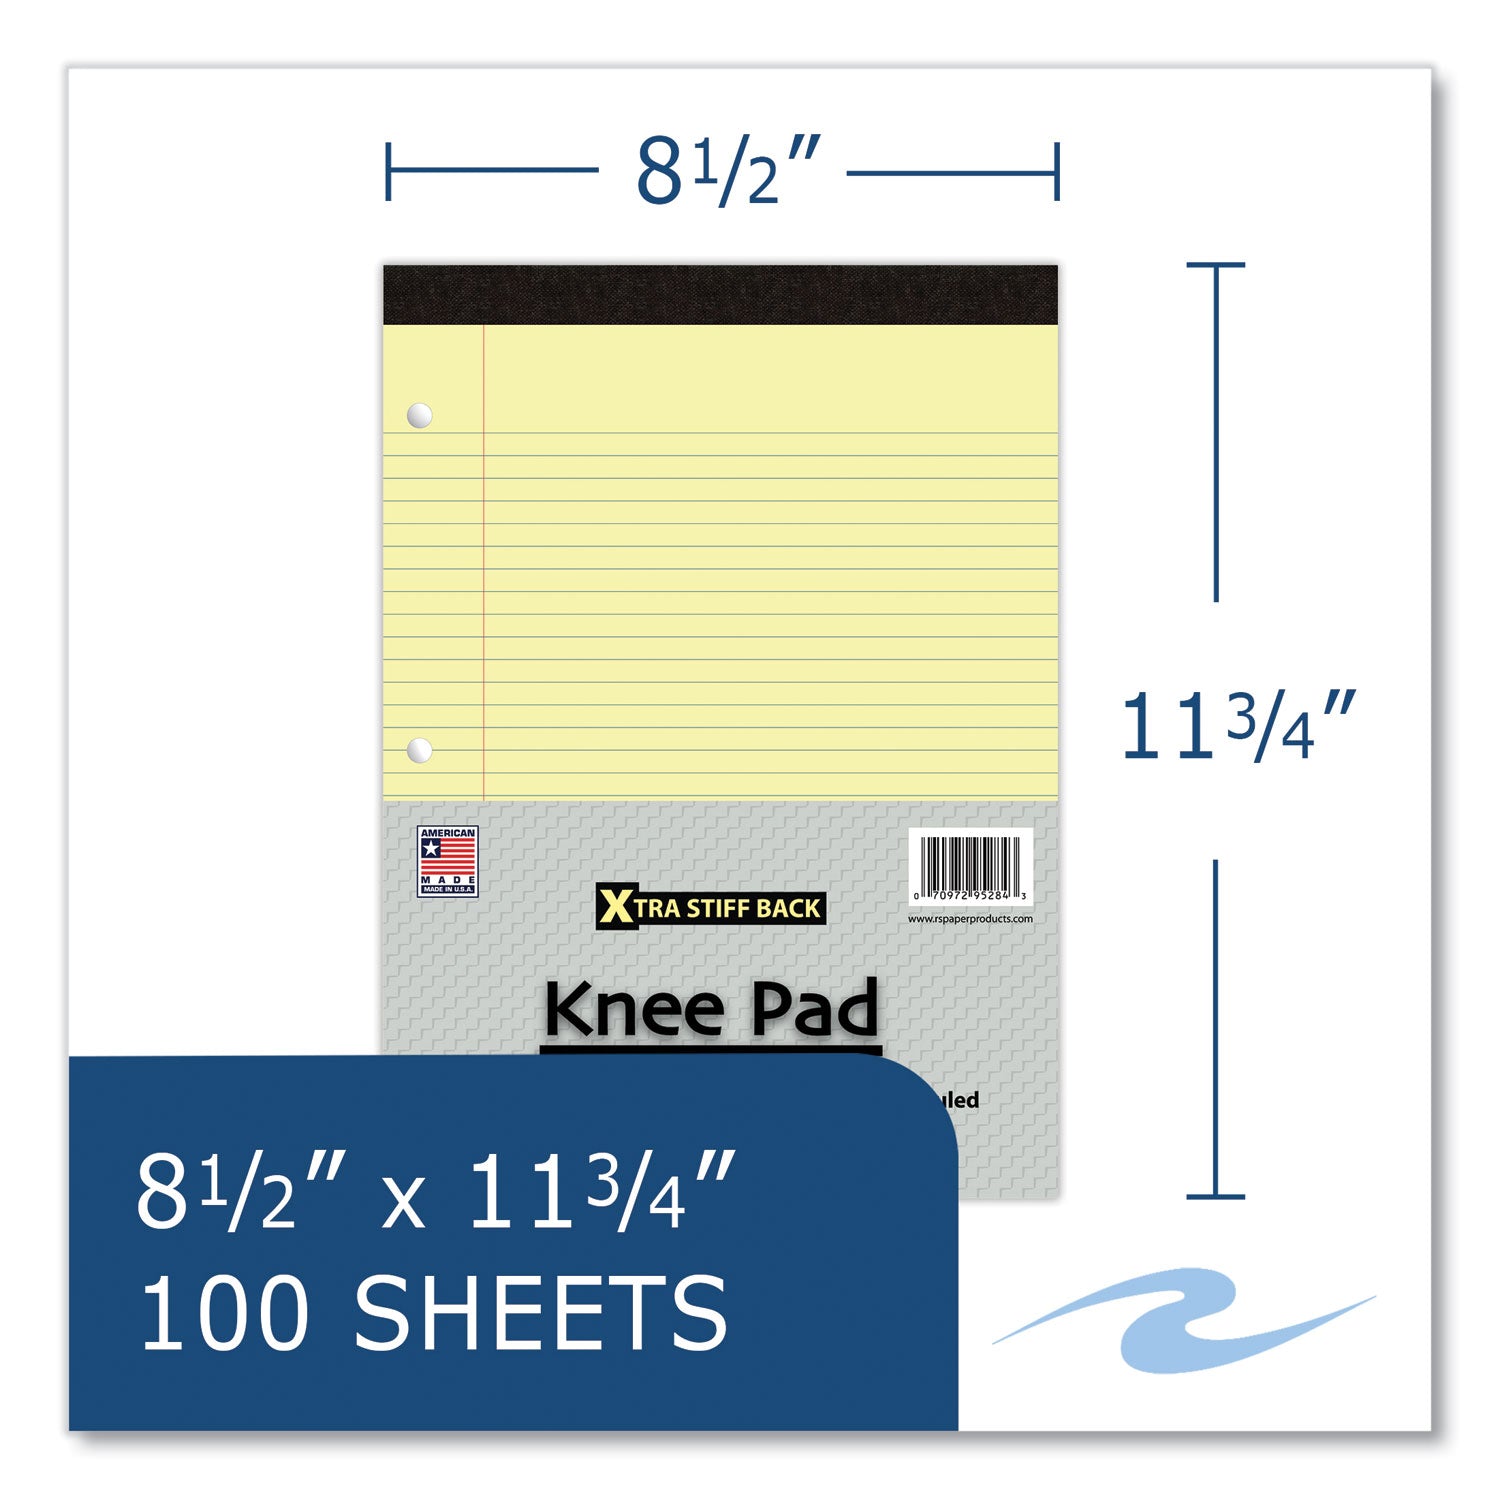 stiff-back-pad-medium-college-rule-100-canary-85-x-11-sheets-36-carton-ships-in-4-6-business-days_roa95284cs - 5